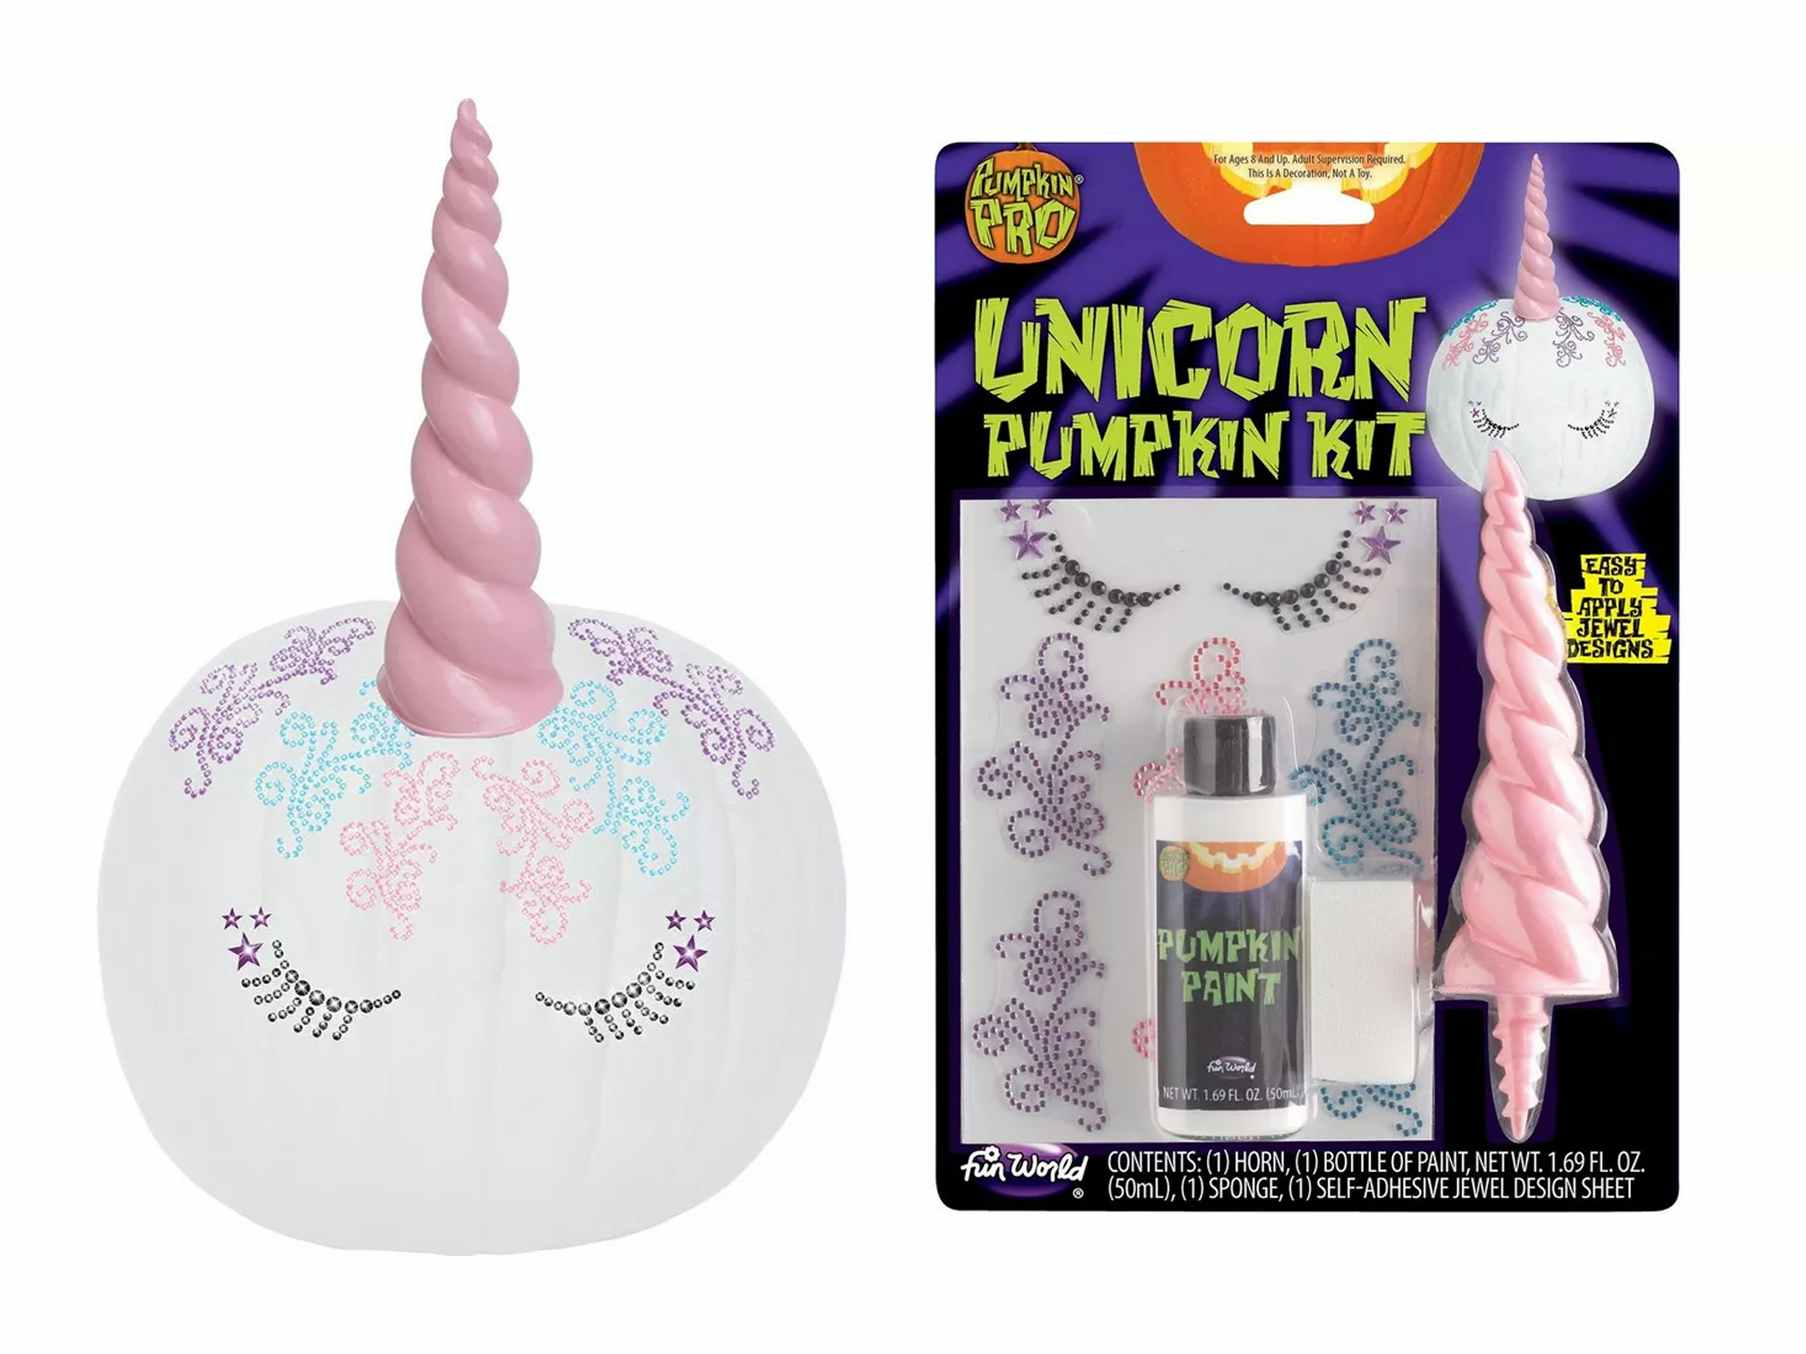 a pumpkin decorated as a unicorn and the kit available at Party City